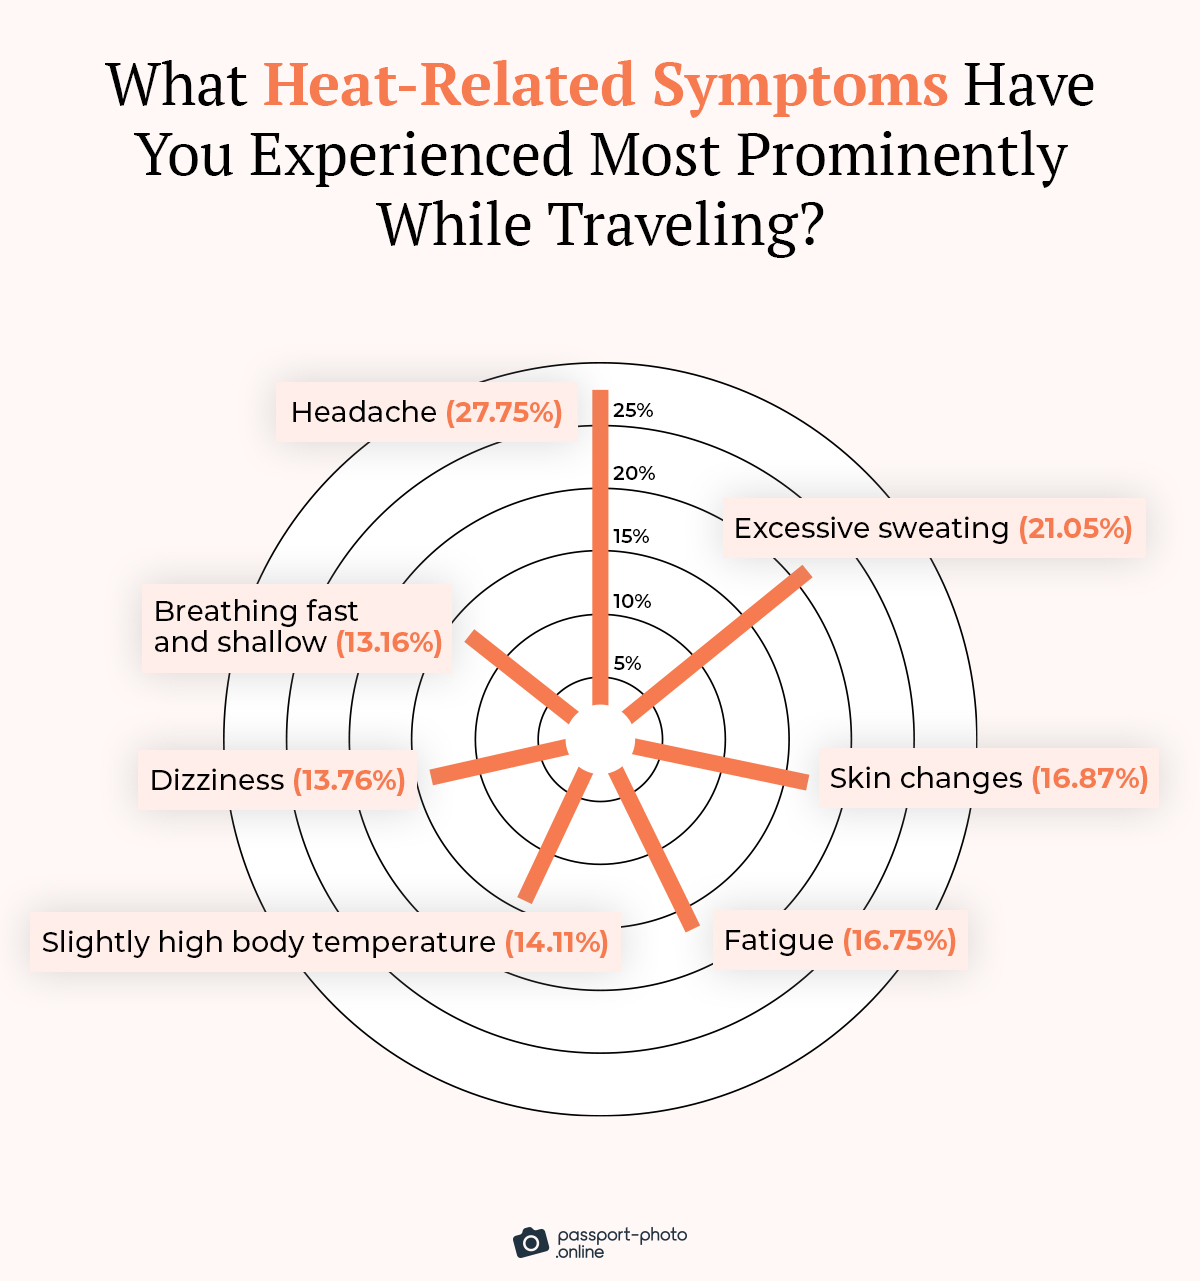 Most common heat-related symptoms travelers experience, with headache, excessive sweating, and skin changes leading the list